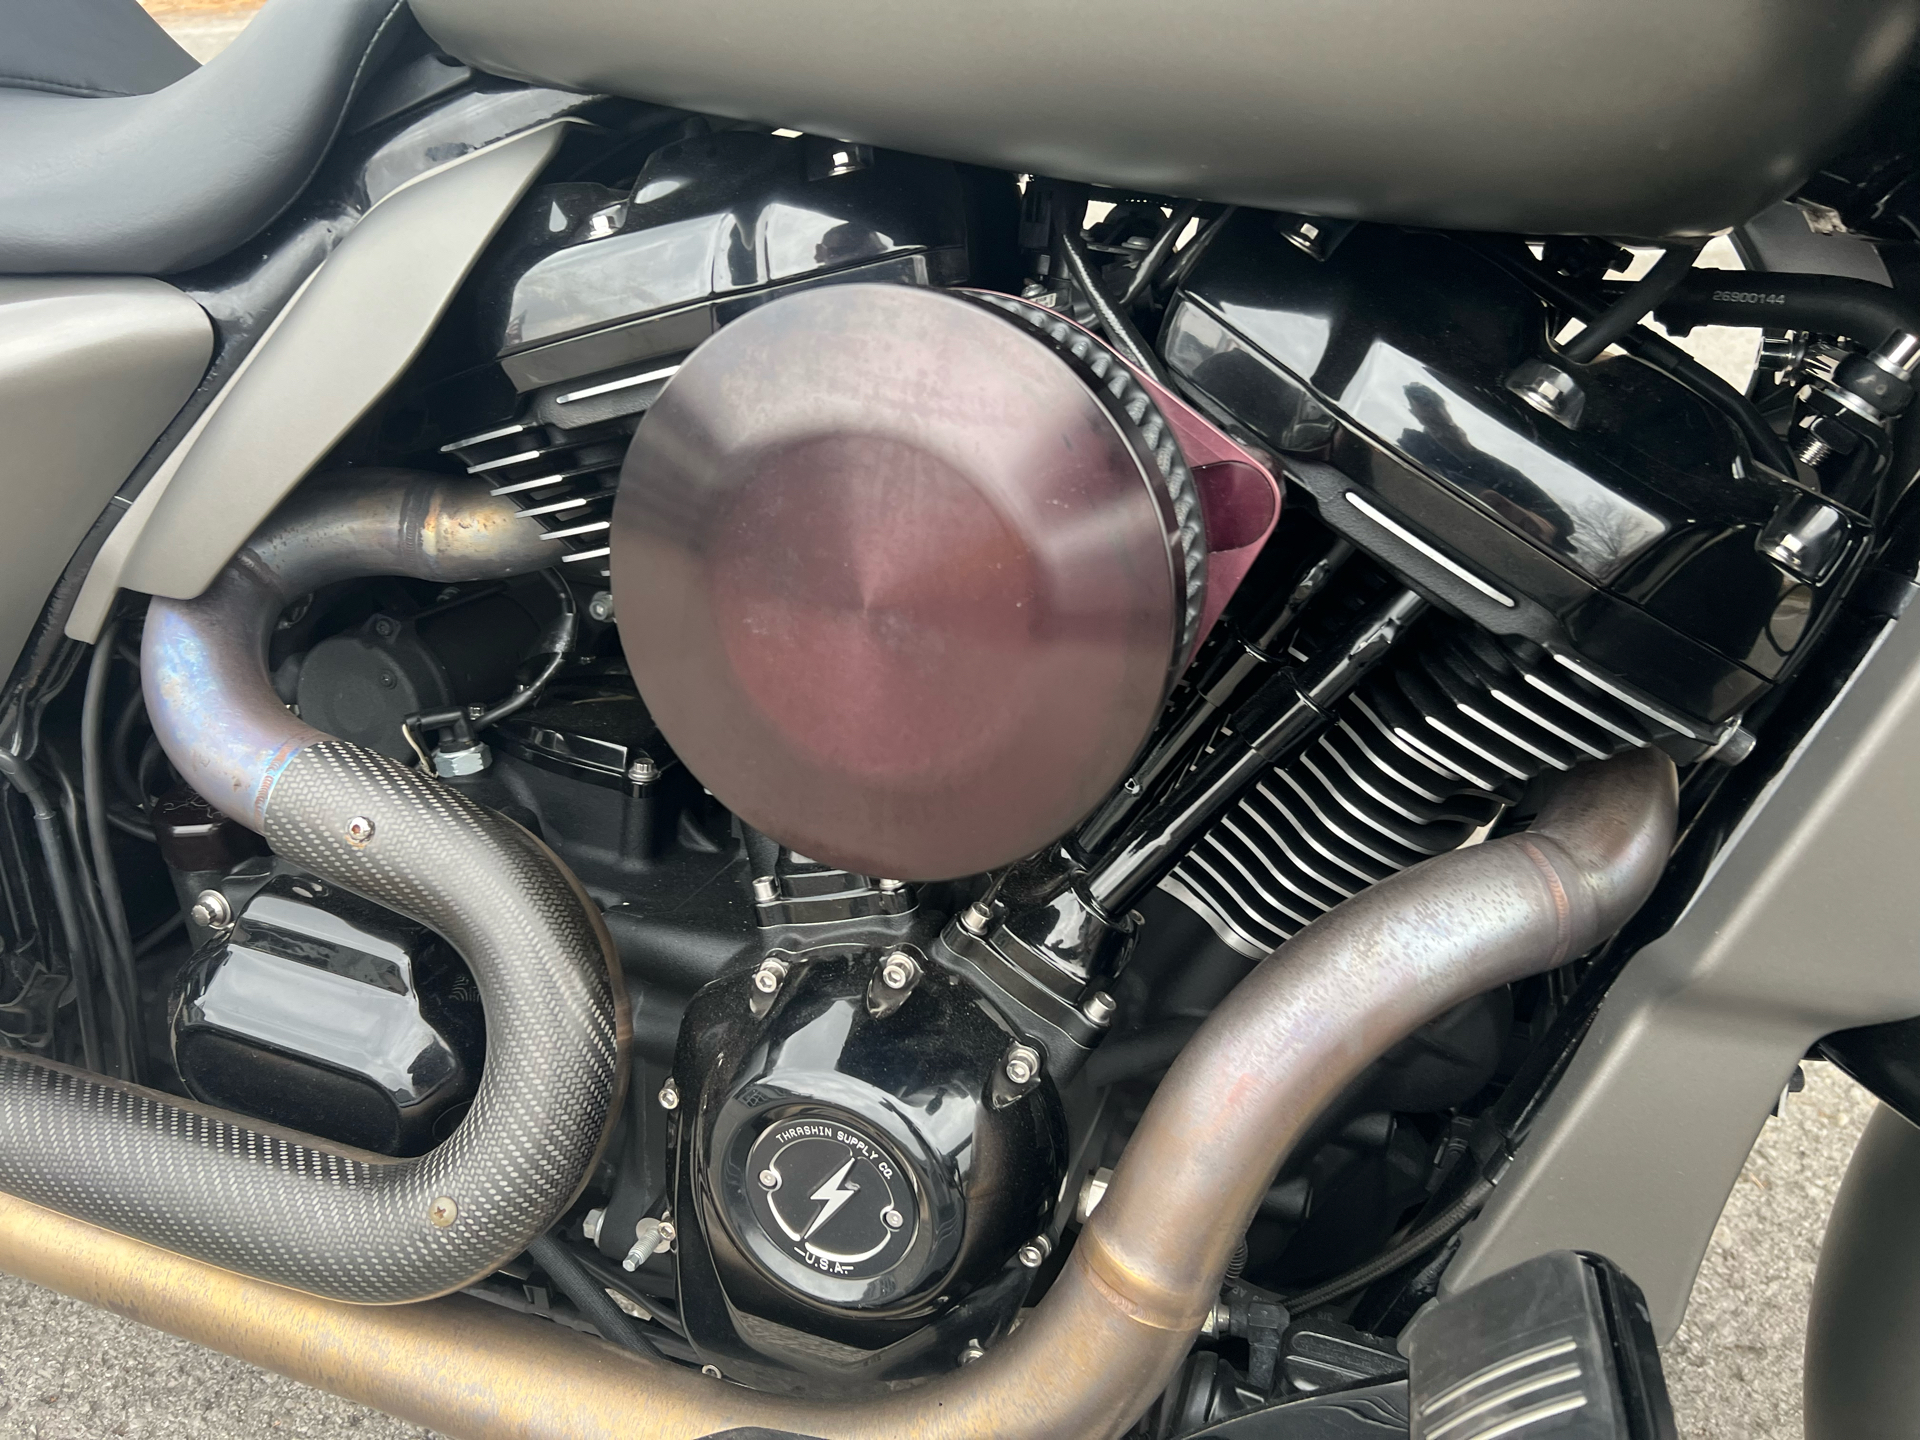 2019 Harley-Davidson Road Glide® Special in Franklin, Tennessee - Photo 2